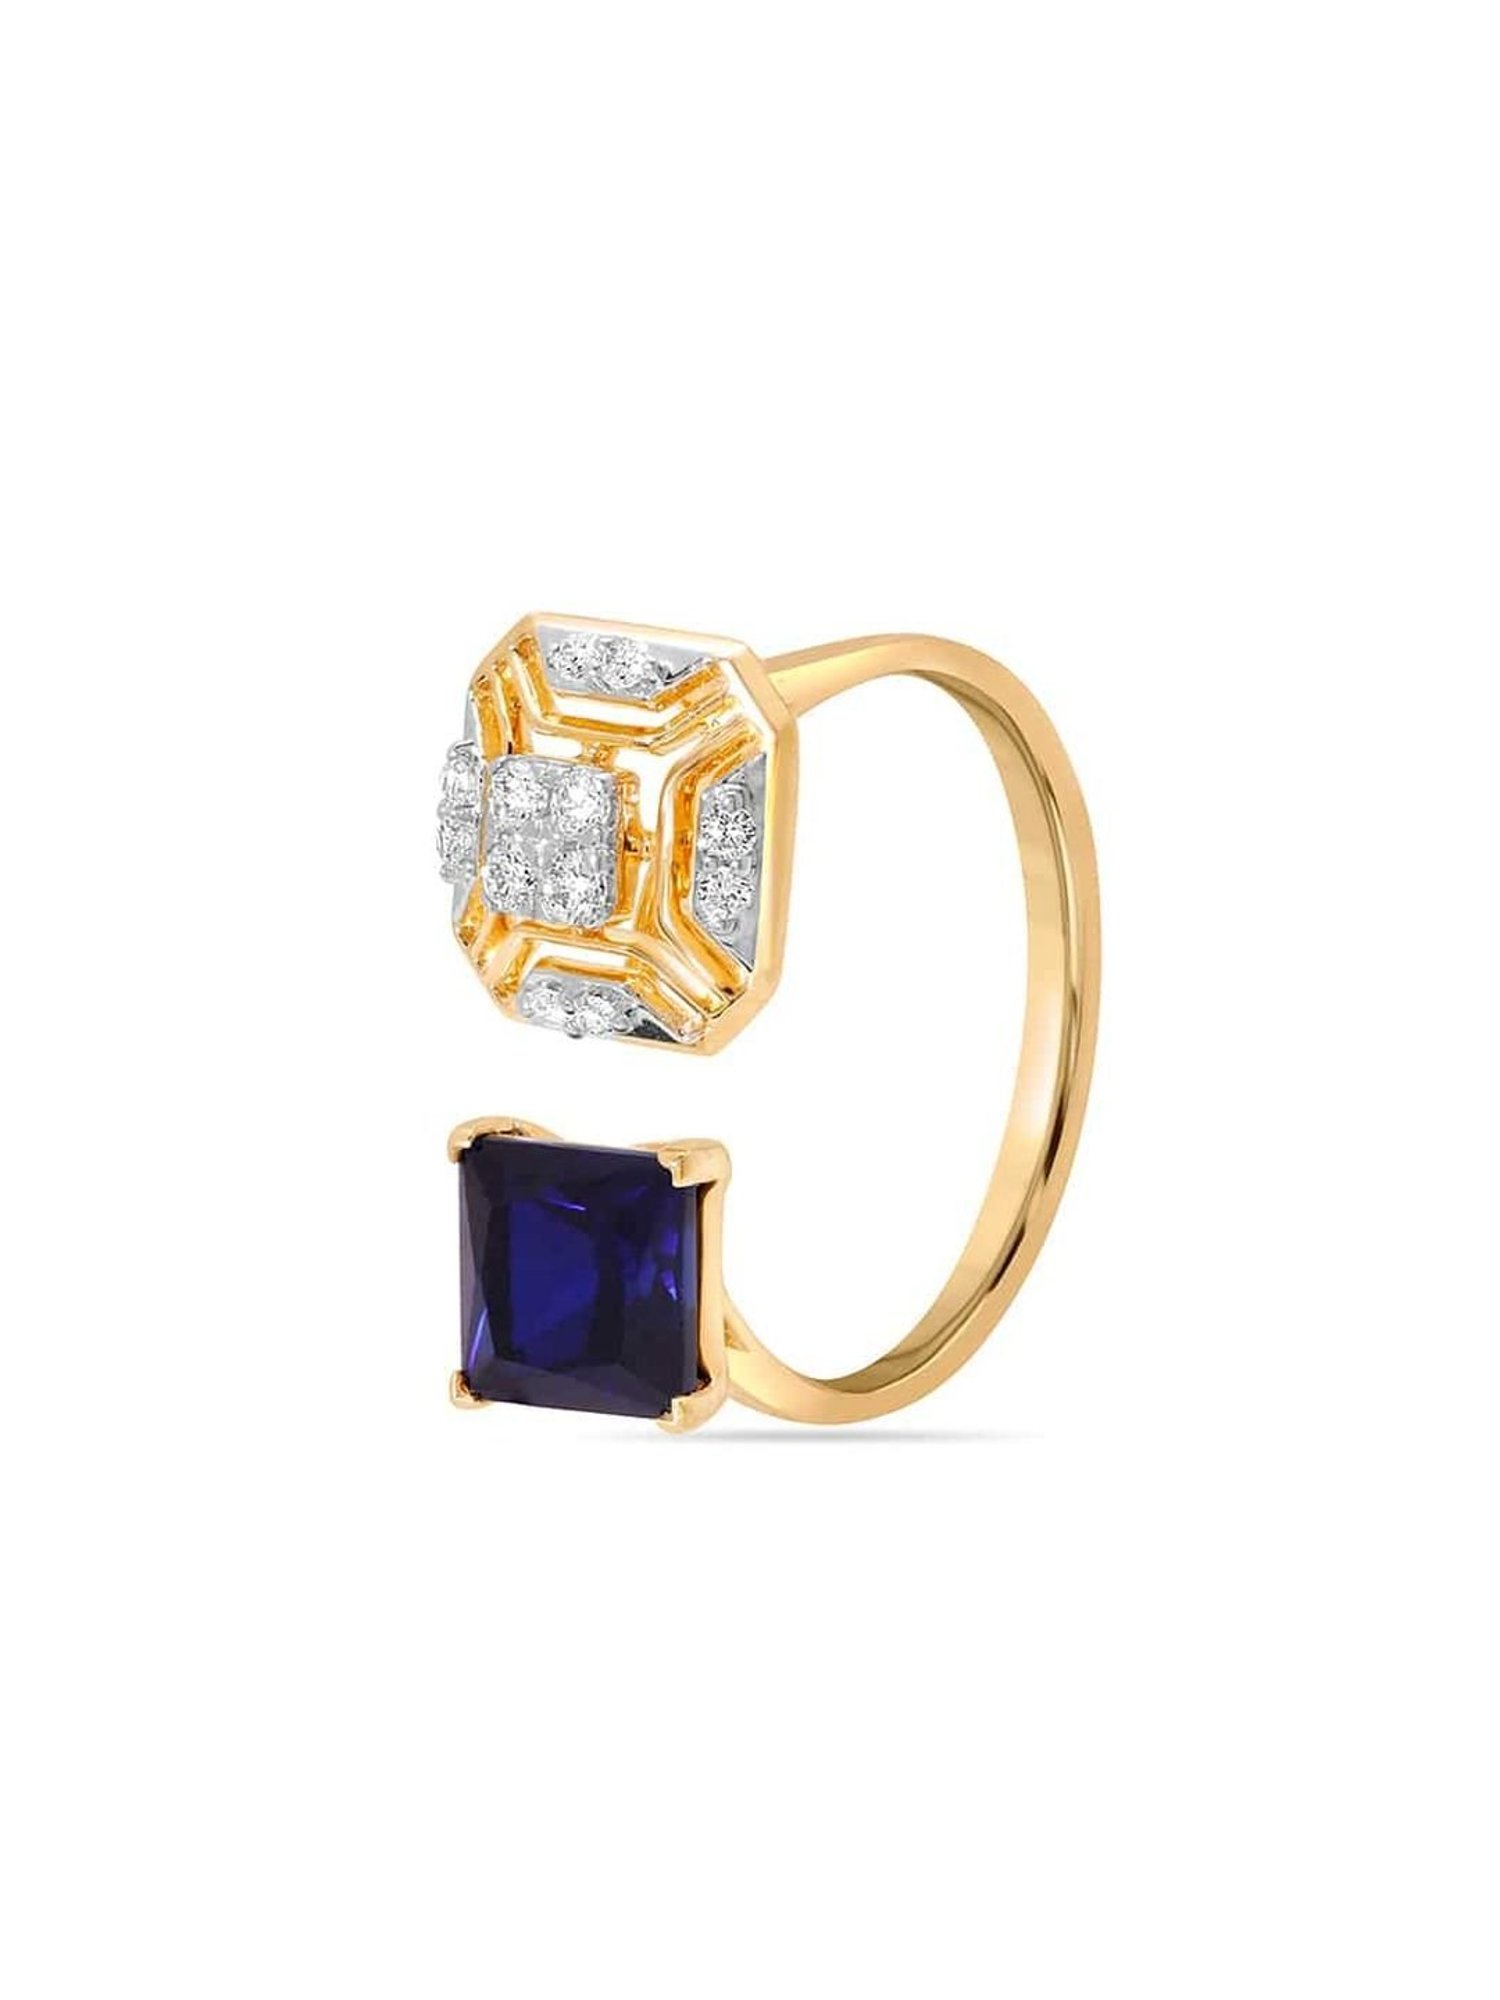 Buy Blue Sapphire Ring Tanishq Online In India - Etsy India